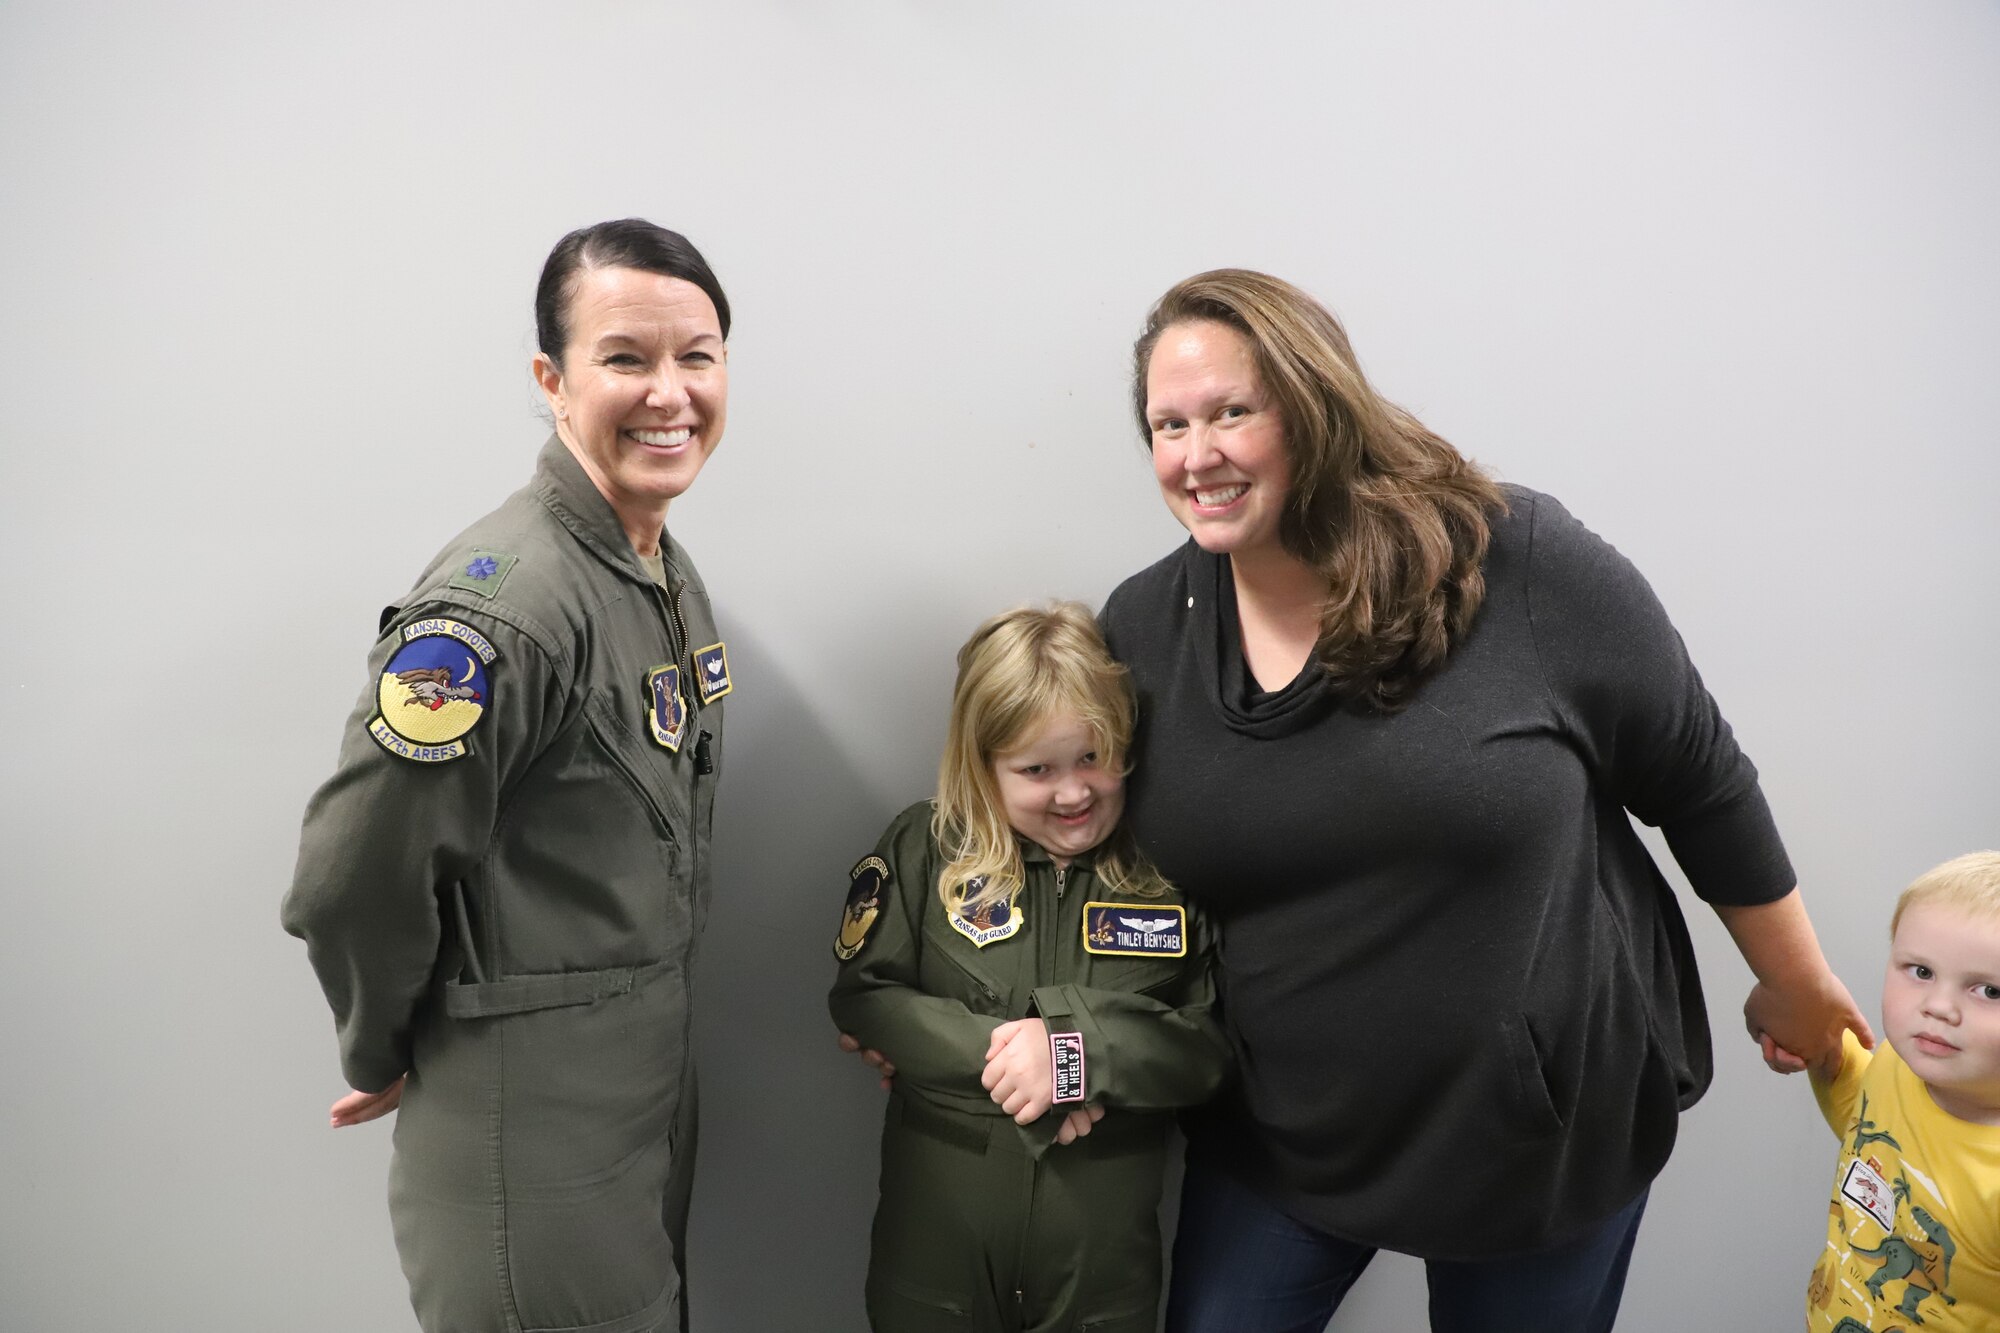 Tinley Benychek, Pilot for the Day, poses in her flight suit with Lt. Col. Marjorie Norton, 117th Air Refueling Squadron commander, and family at the 190th Air Refueling Wing in Topeka, KS, October 24, 2022. Tinley is the first Pilot for a Day participant at the 190th ARW.